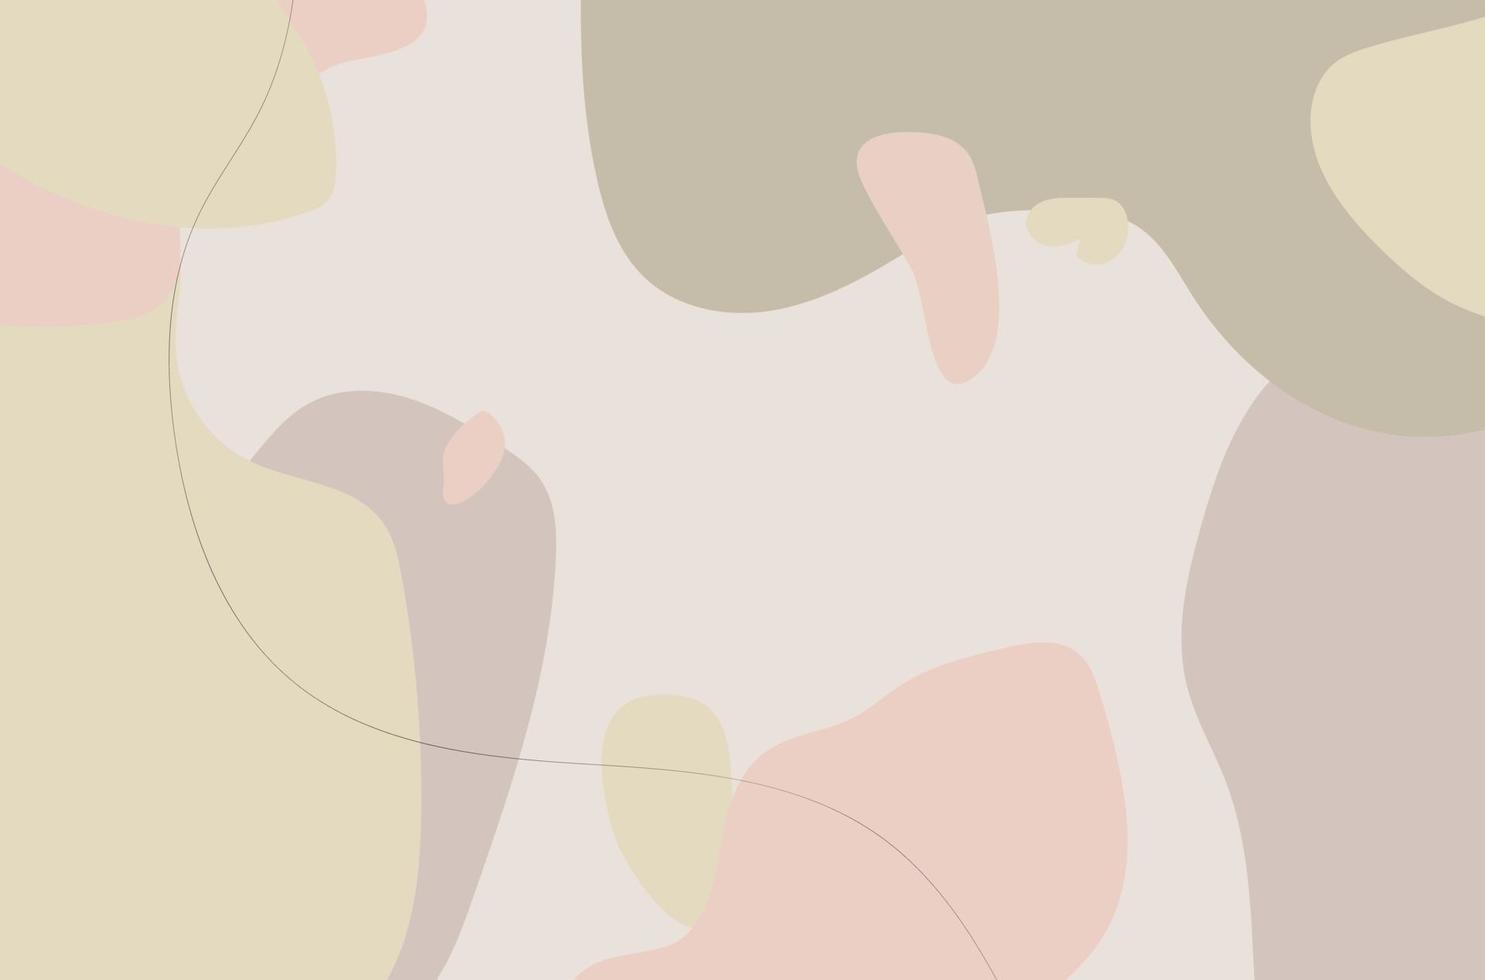 An abstract cures of pastel color stylish templates design, with modern shapes and line in nude pastel colors mode templates vector